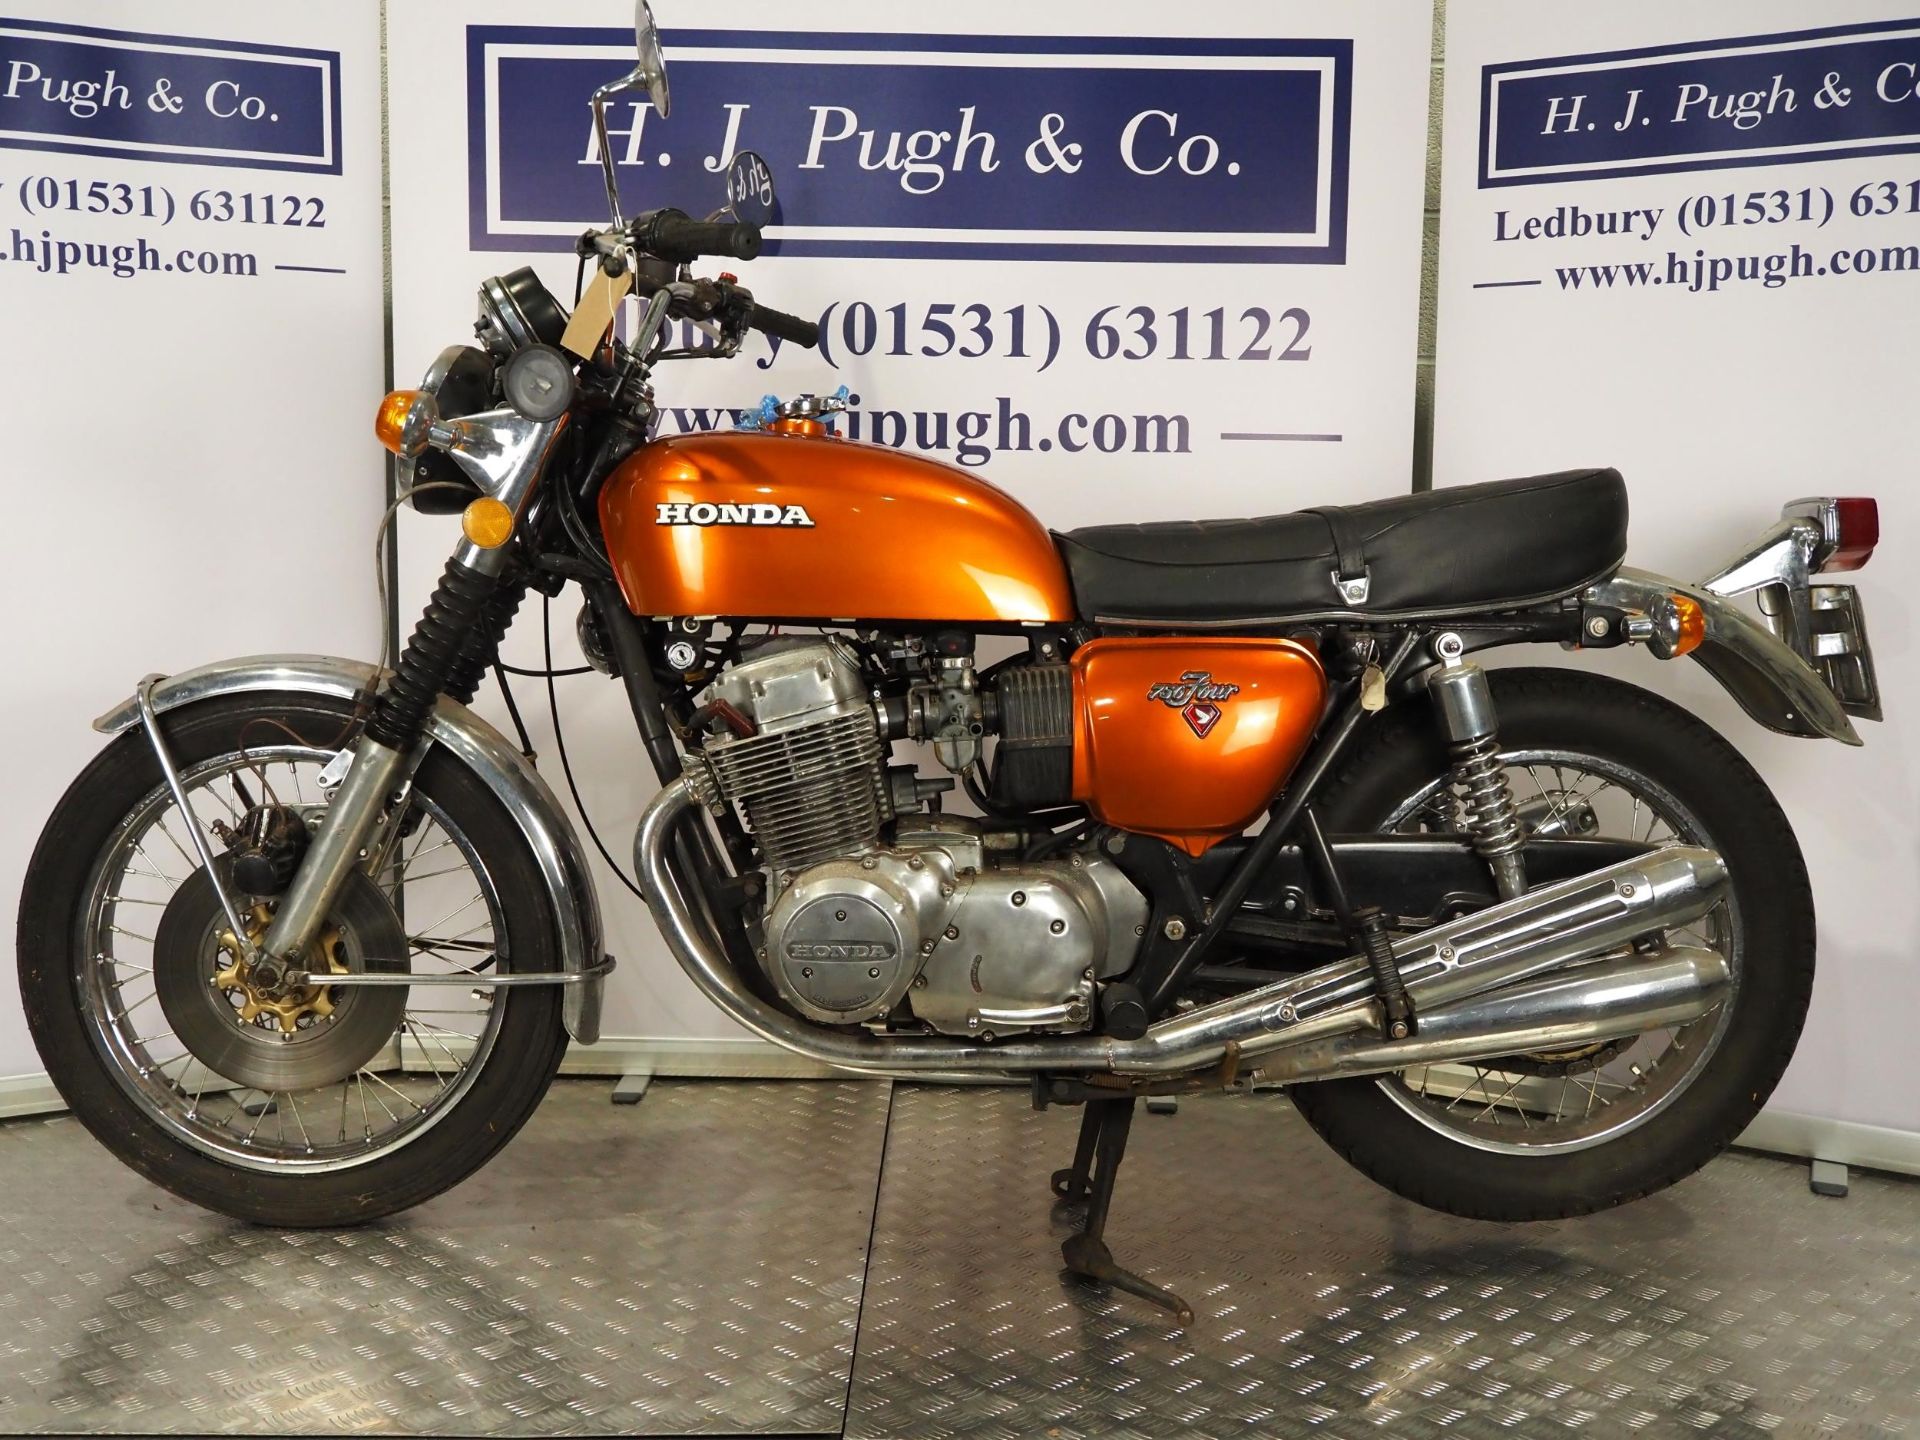 Honda 750 Four motorcycle. 1972. 736cc. Frame No. 2024351 Engine No. 2031888 Engine turns over but - Image 7 of 7